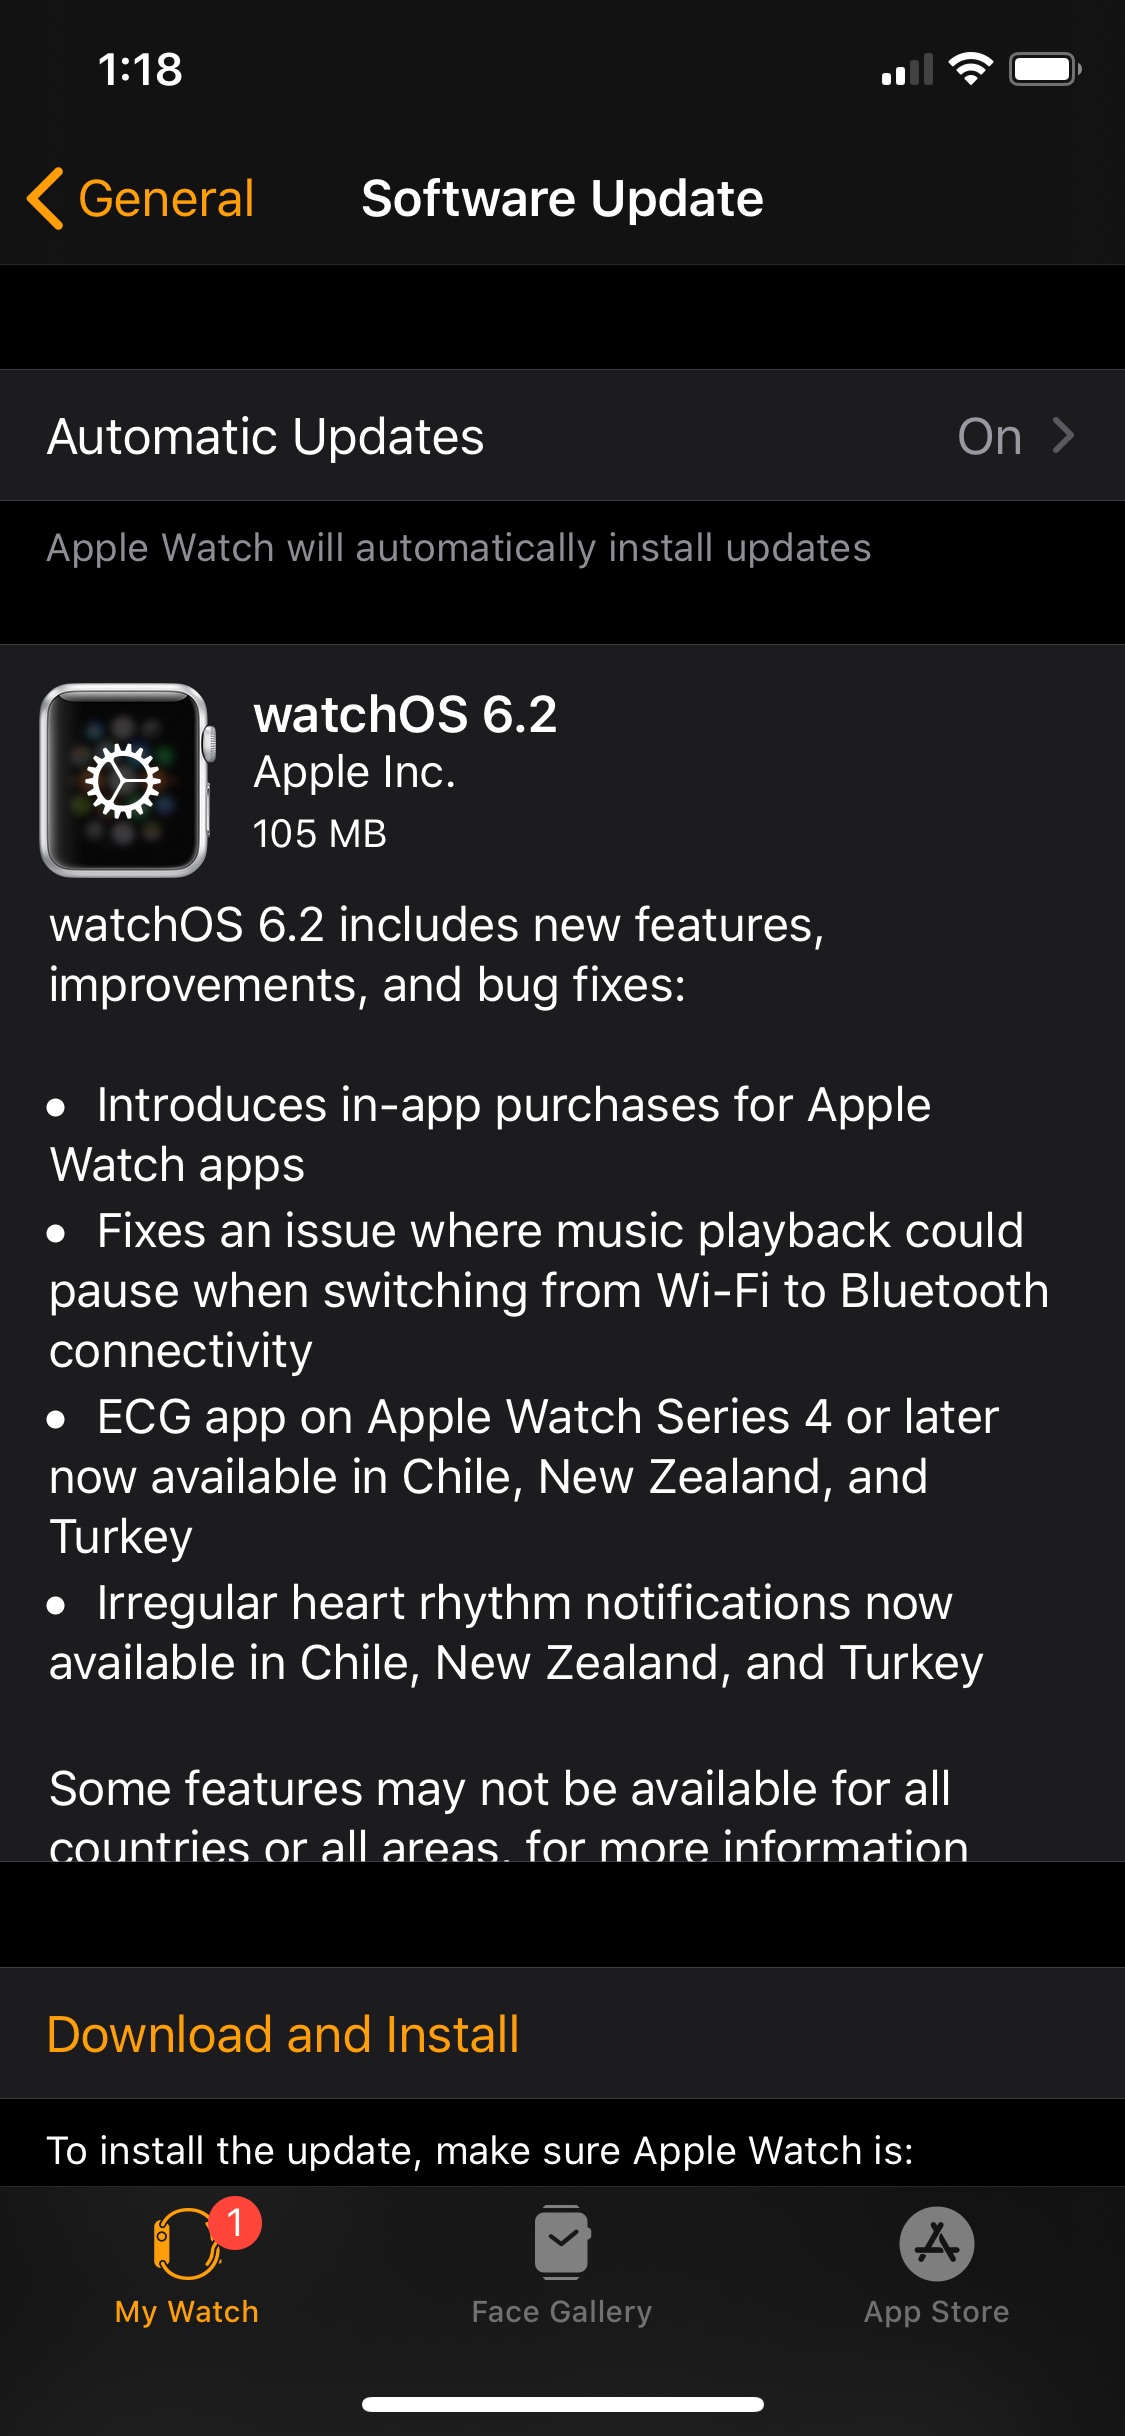 Apple Releases watchOS 6.2 With Support for In-App Purchases, Expanded ECG App Availability, More